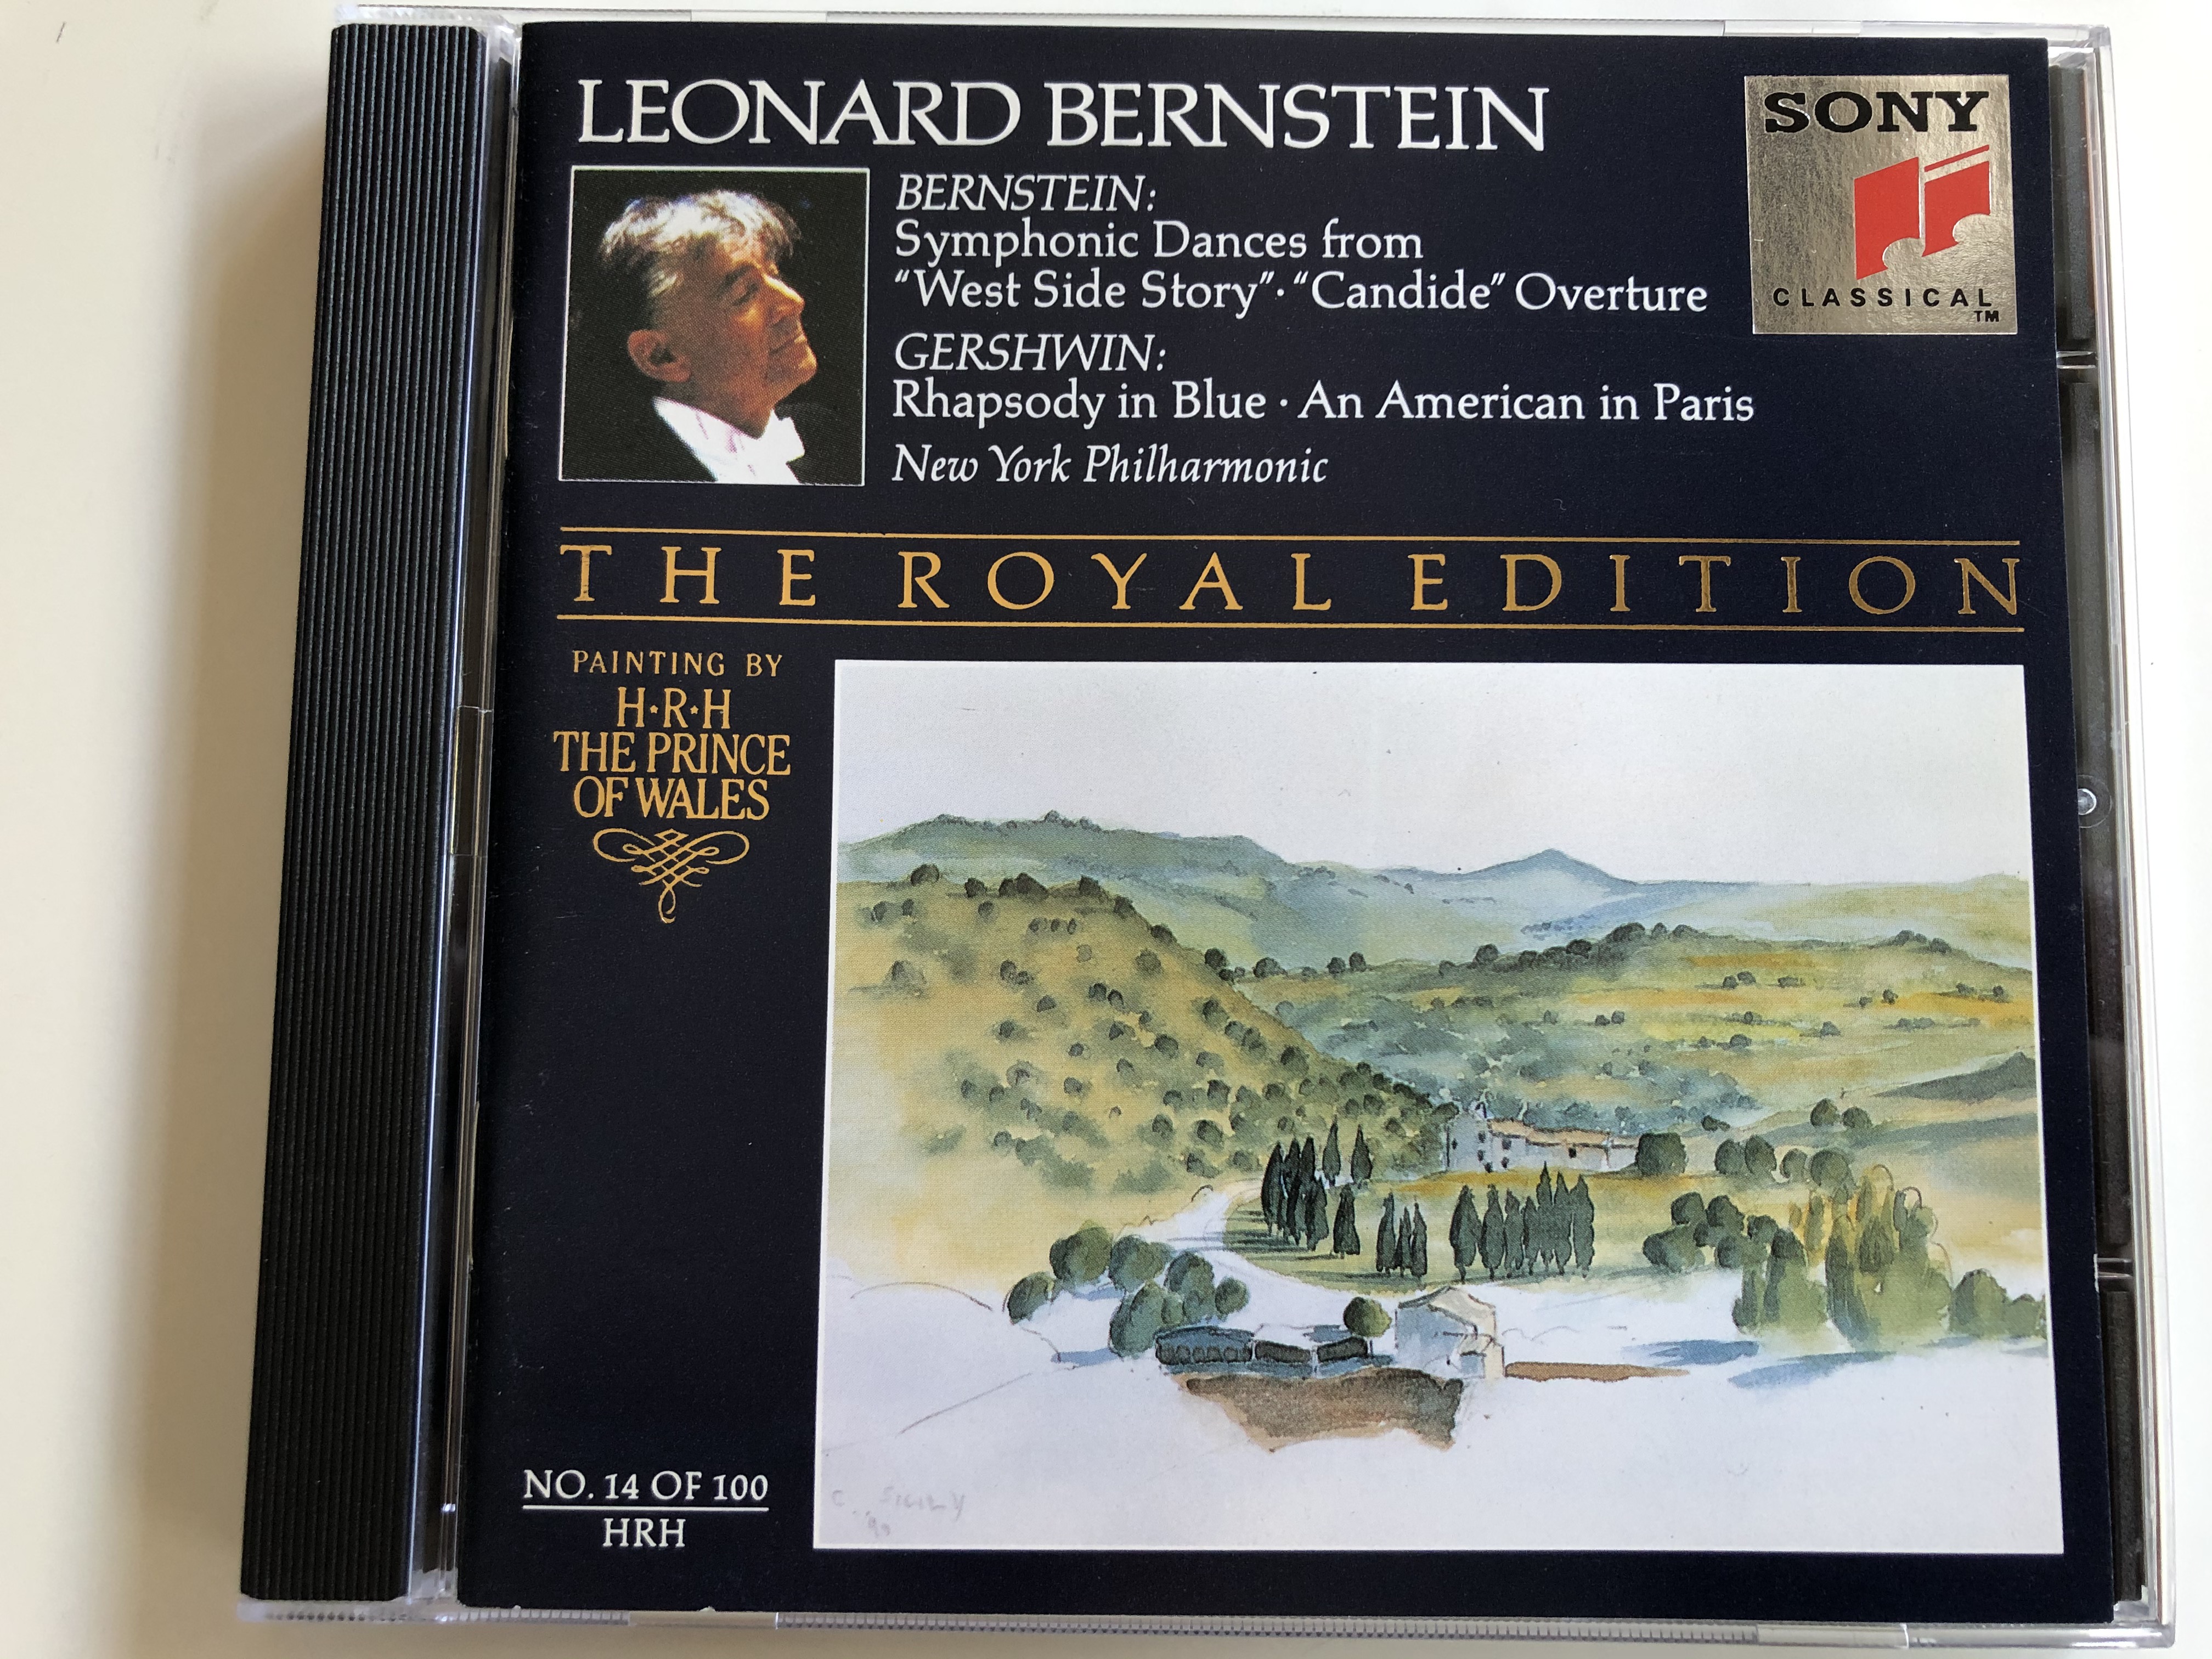 leonard-bernstein-symphonic-dances-from-west-side-story-candide-overture-gershwin-rhapsody-in-blue-an-american-in-paris-new-york-philharmonic-the-royal-edition-painting-by-h.r-1-.jpg